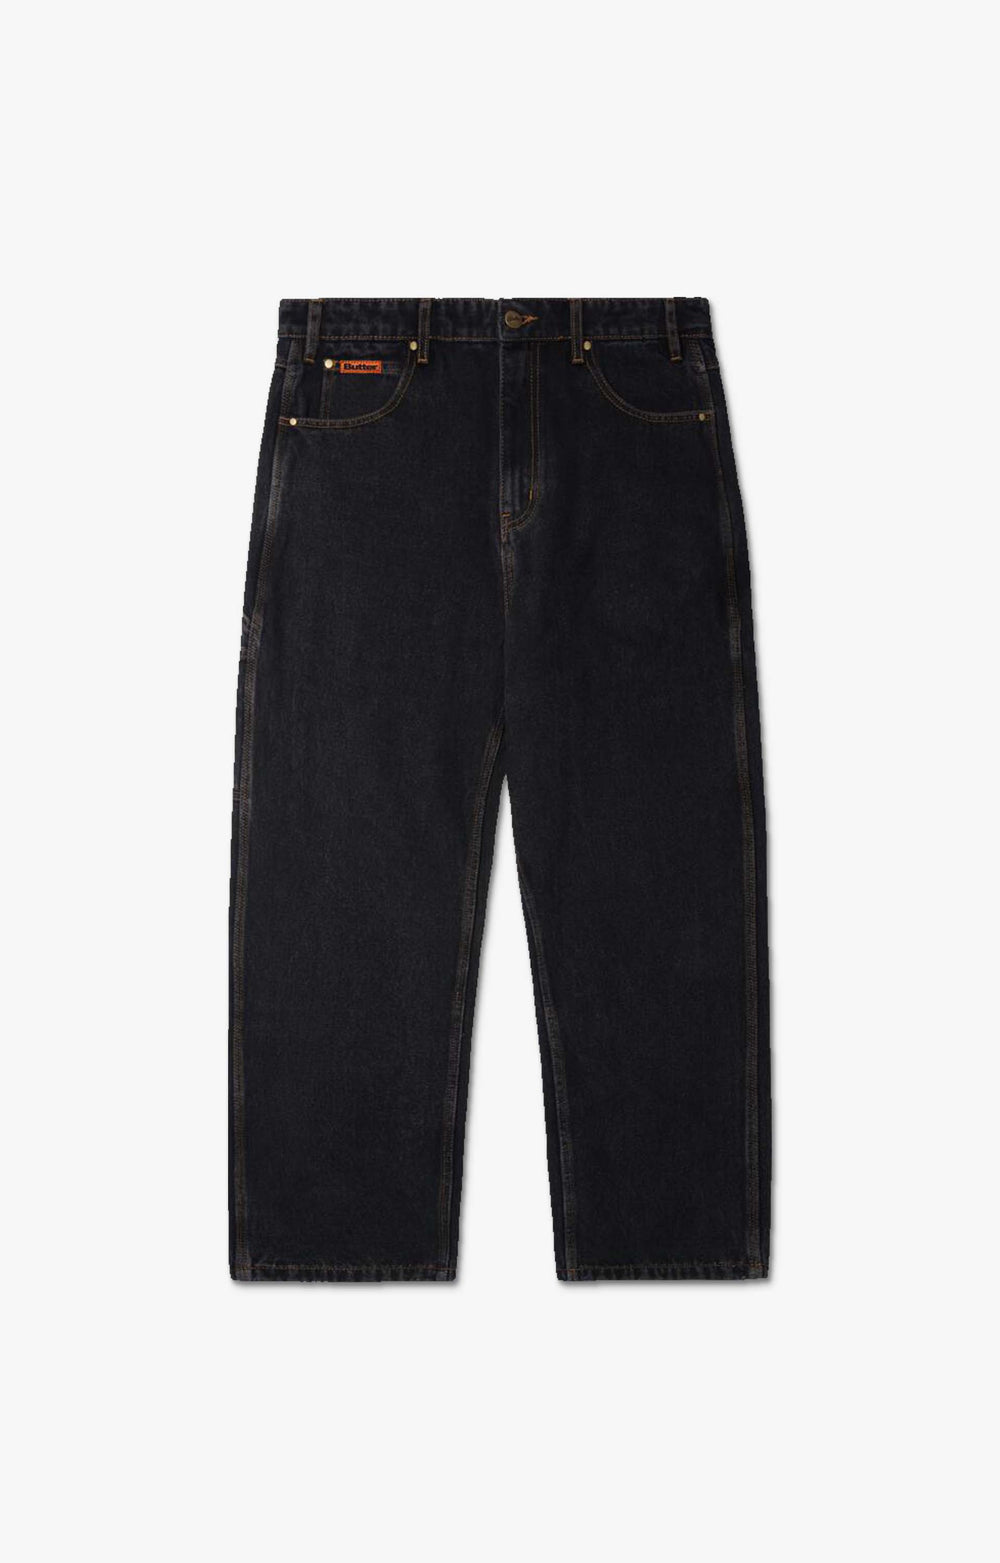 Butter Goods Relaxed Denim Pants, Washed Black